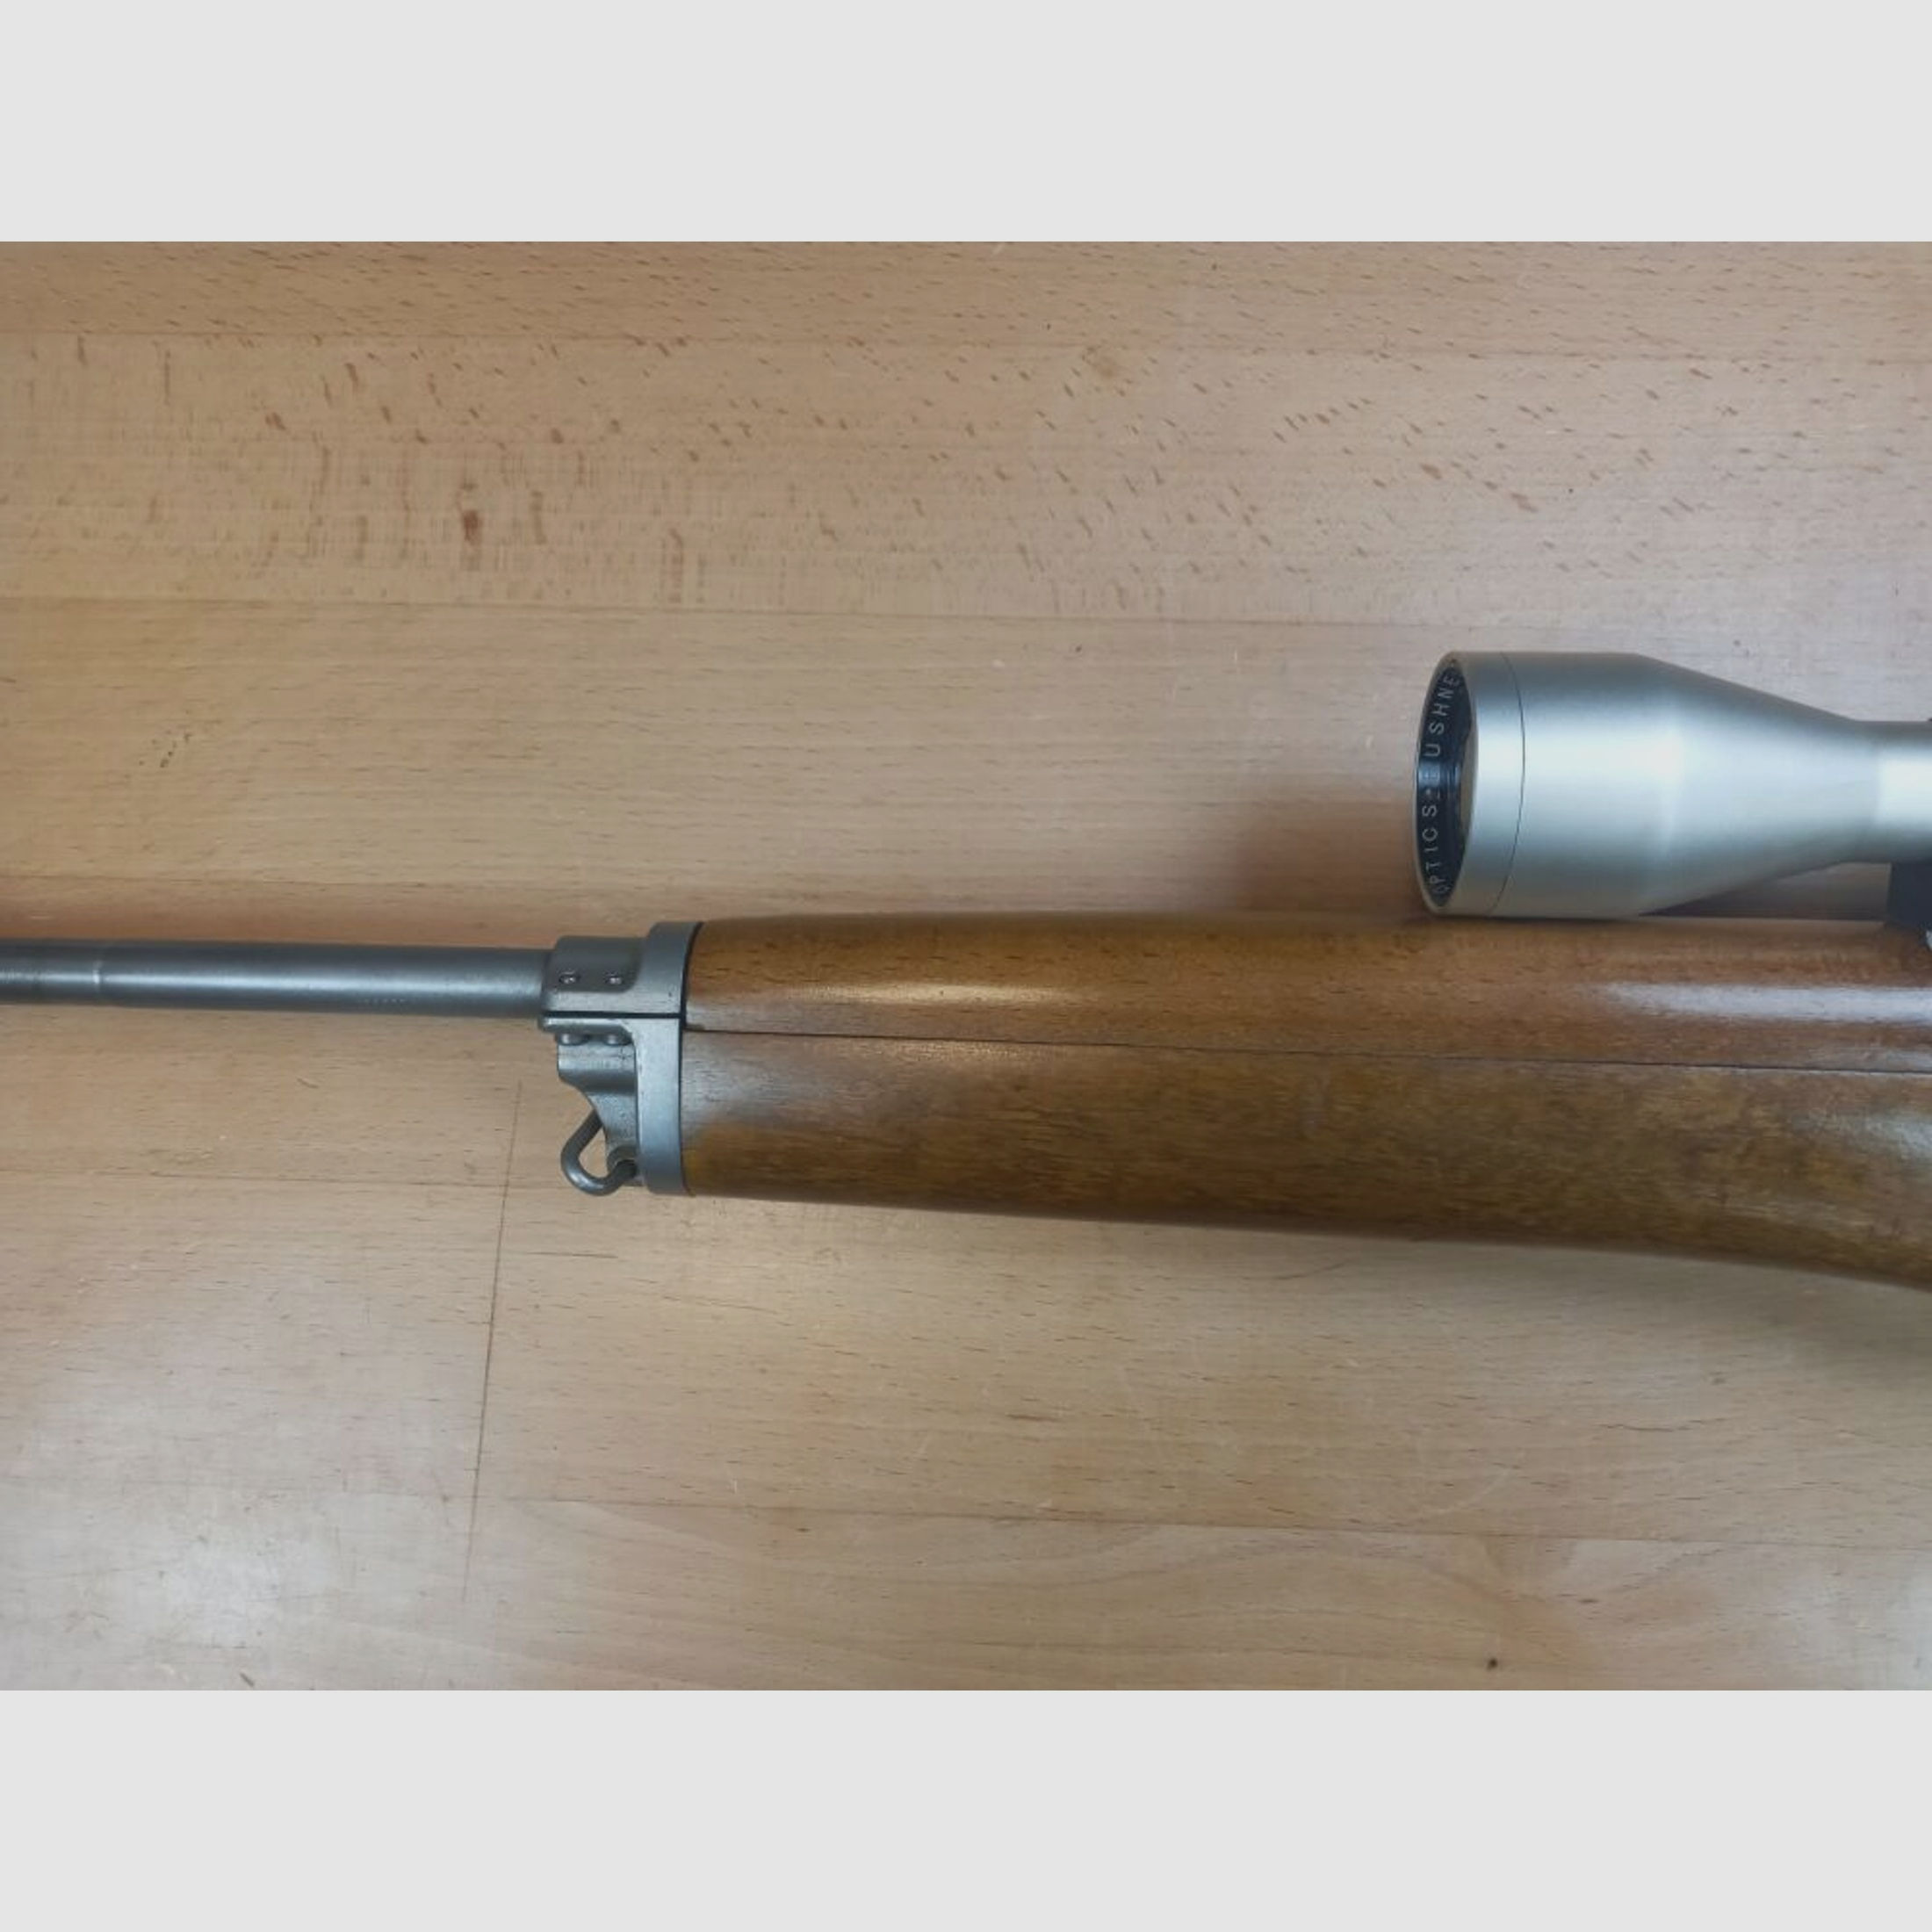 Ruger	 Mini 14 Stainless